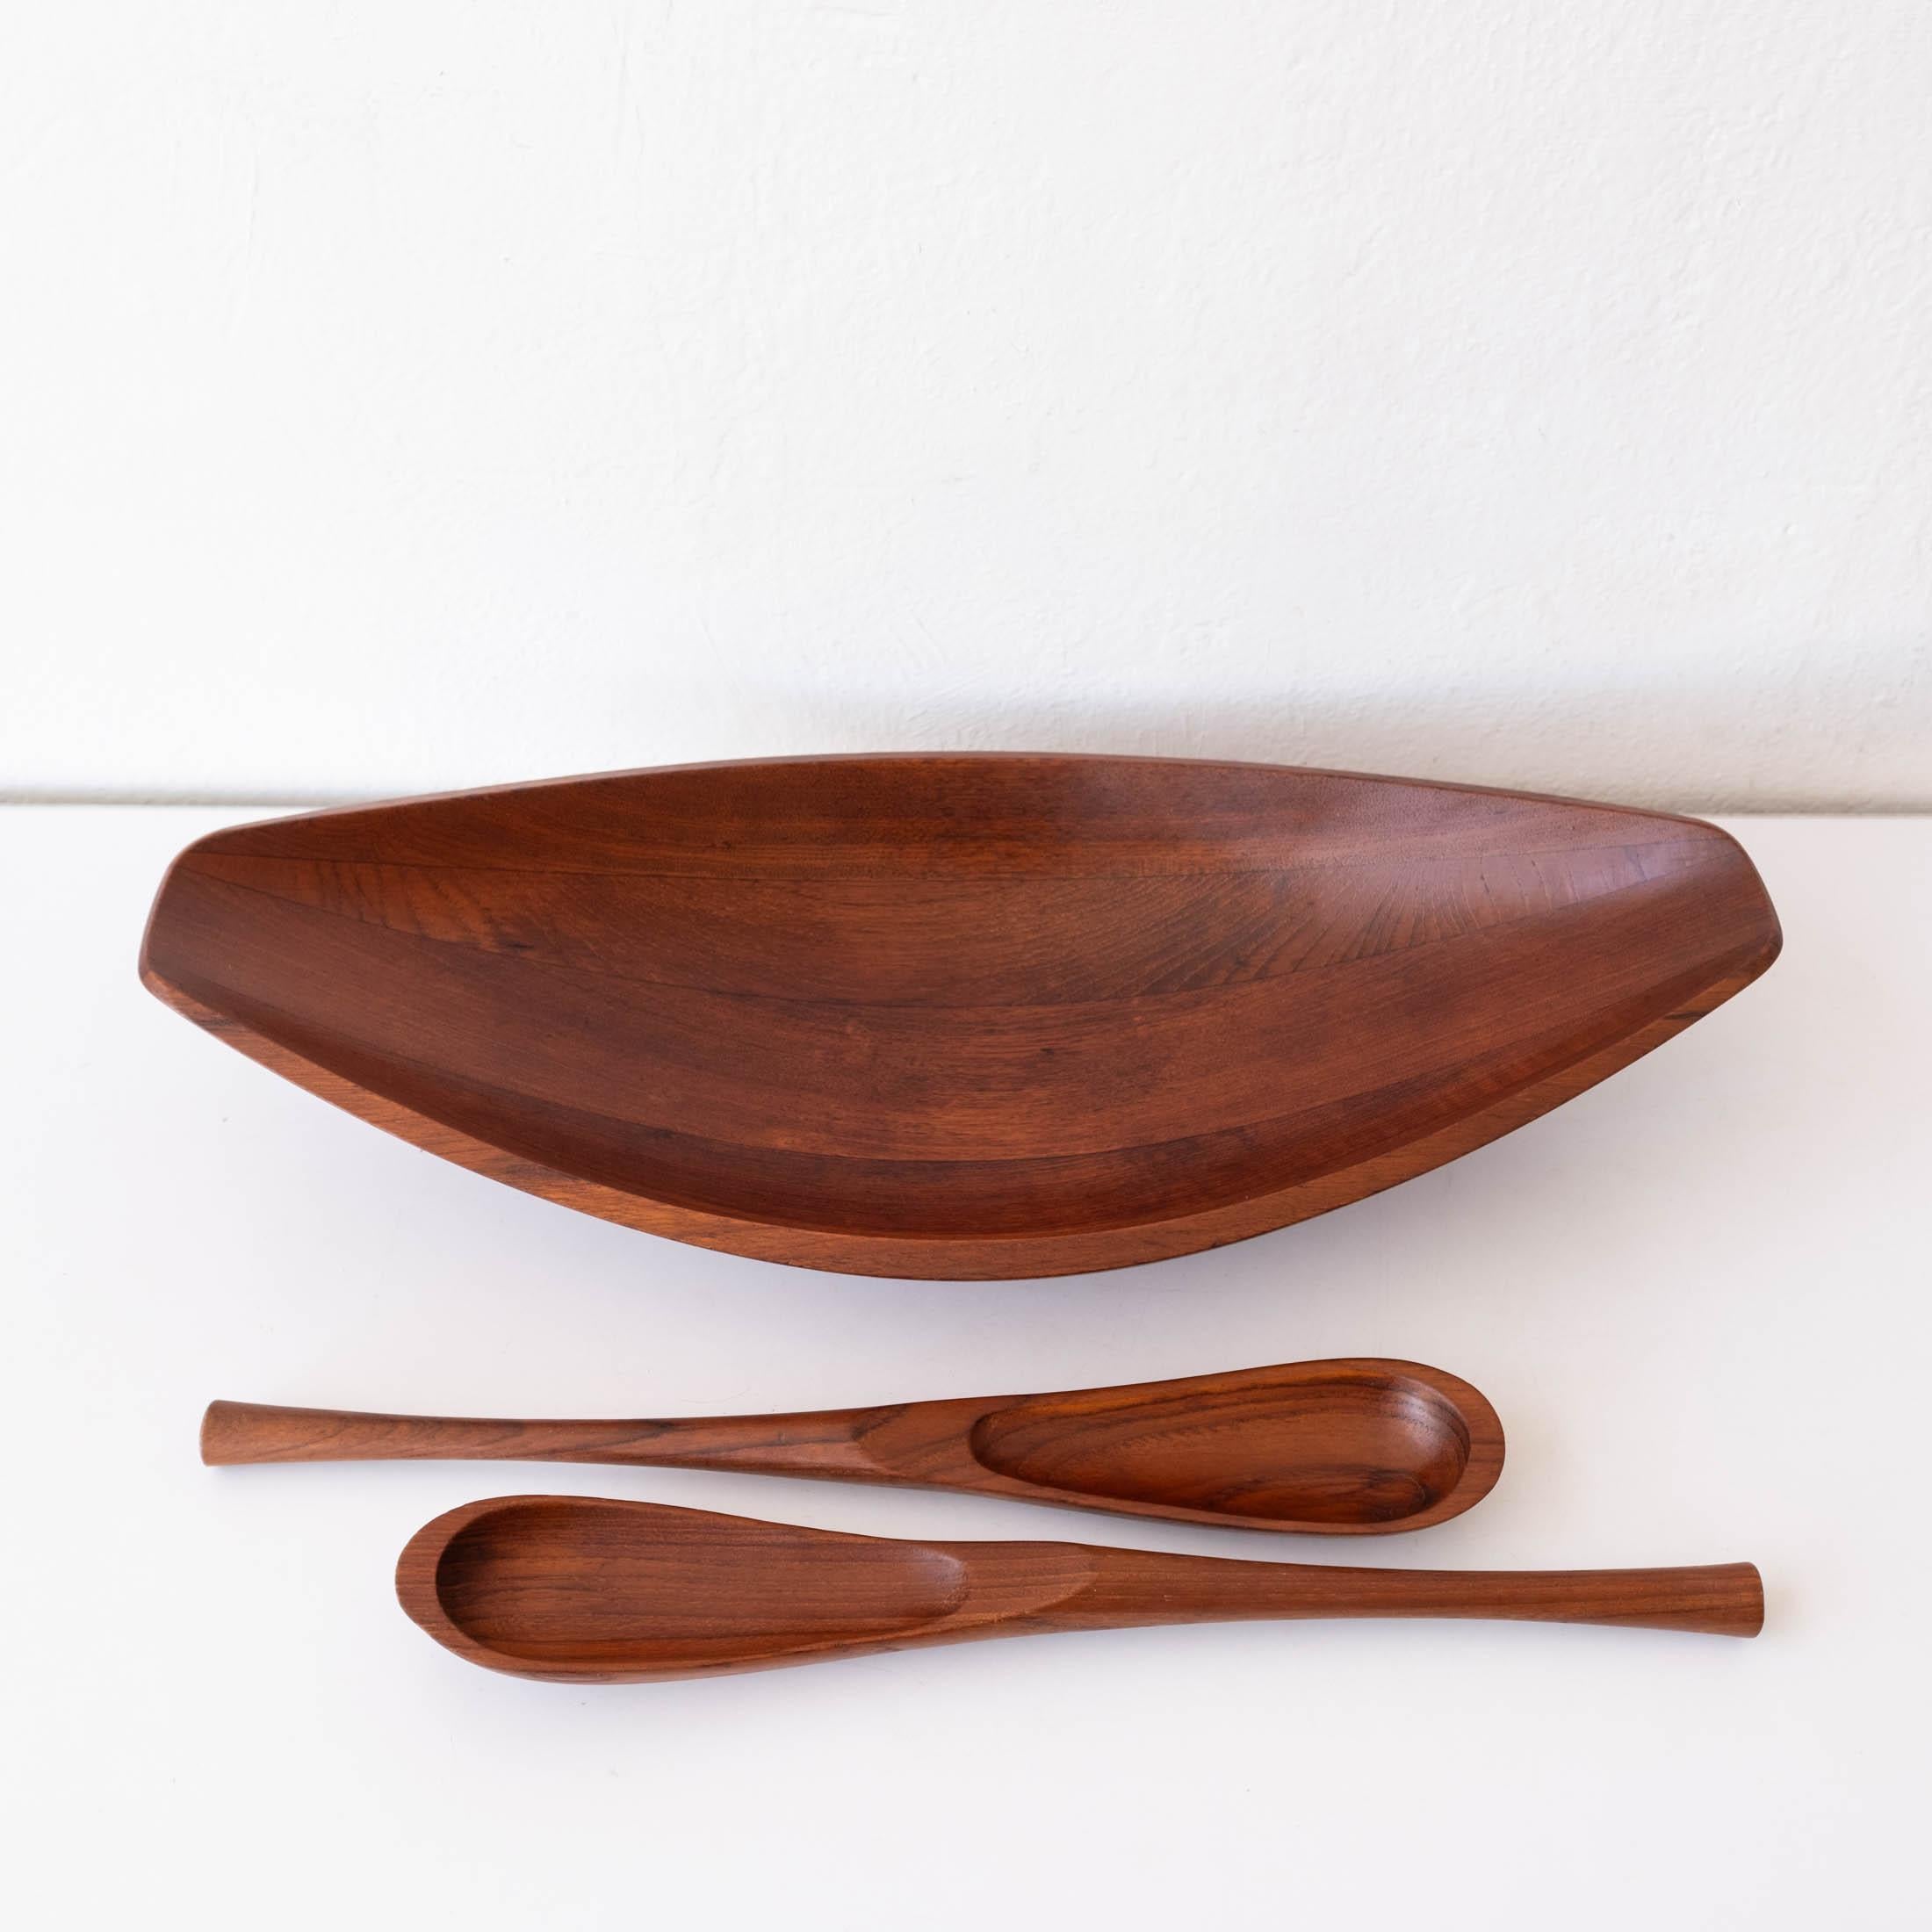 Canoe salad bowl by Jens Quistgaard for Dansk with serving tongs. Staved teak. Both the bowl and tongs have early Dansk marks. Denmark, 1950s.

Jens Harald Quistgaard (1919-2008) was a Danish sculptor and designer, known principally for his work for